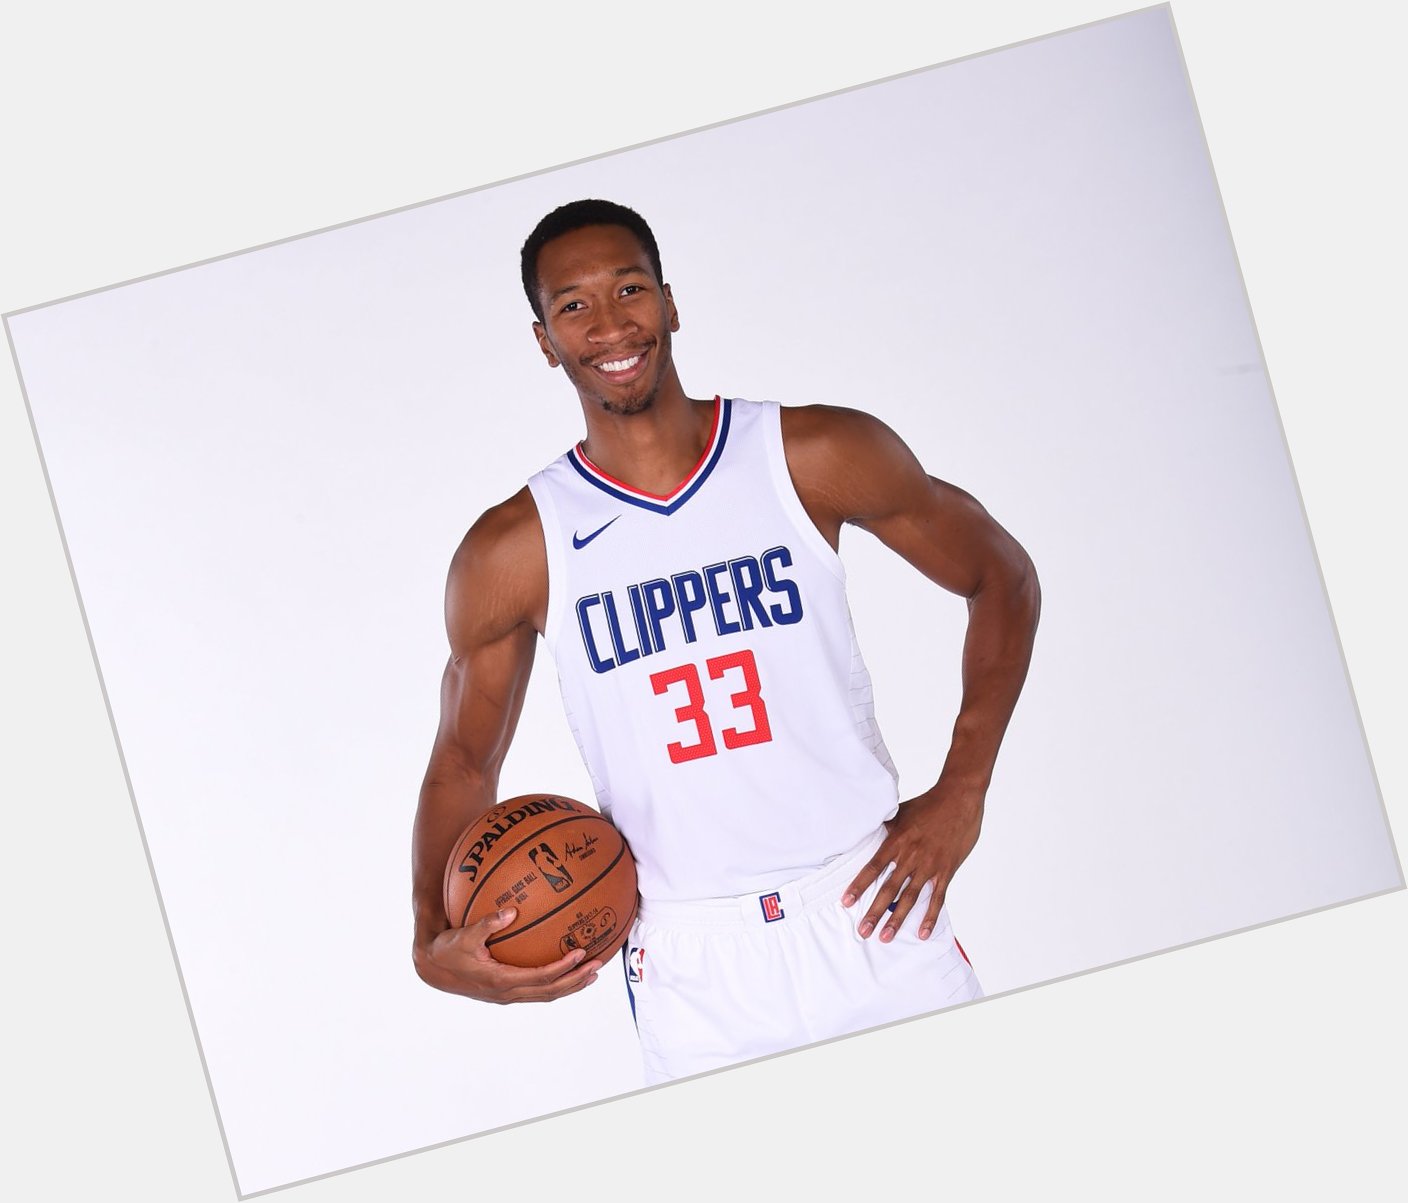 NBA \"Join us in wishing Wesley Johnson of the LAClippers a HAPPY 31st BIRTHDAY!  